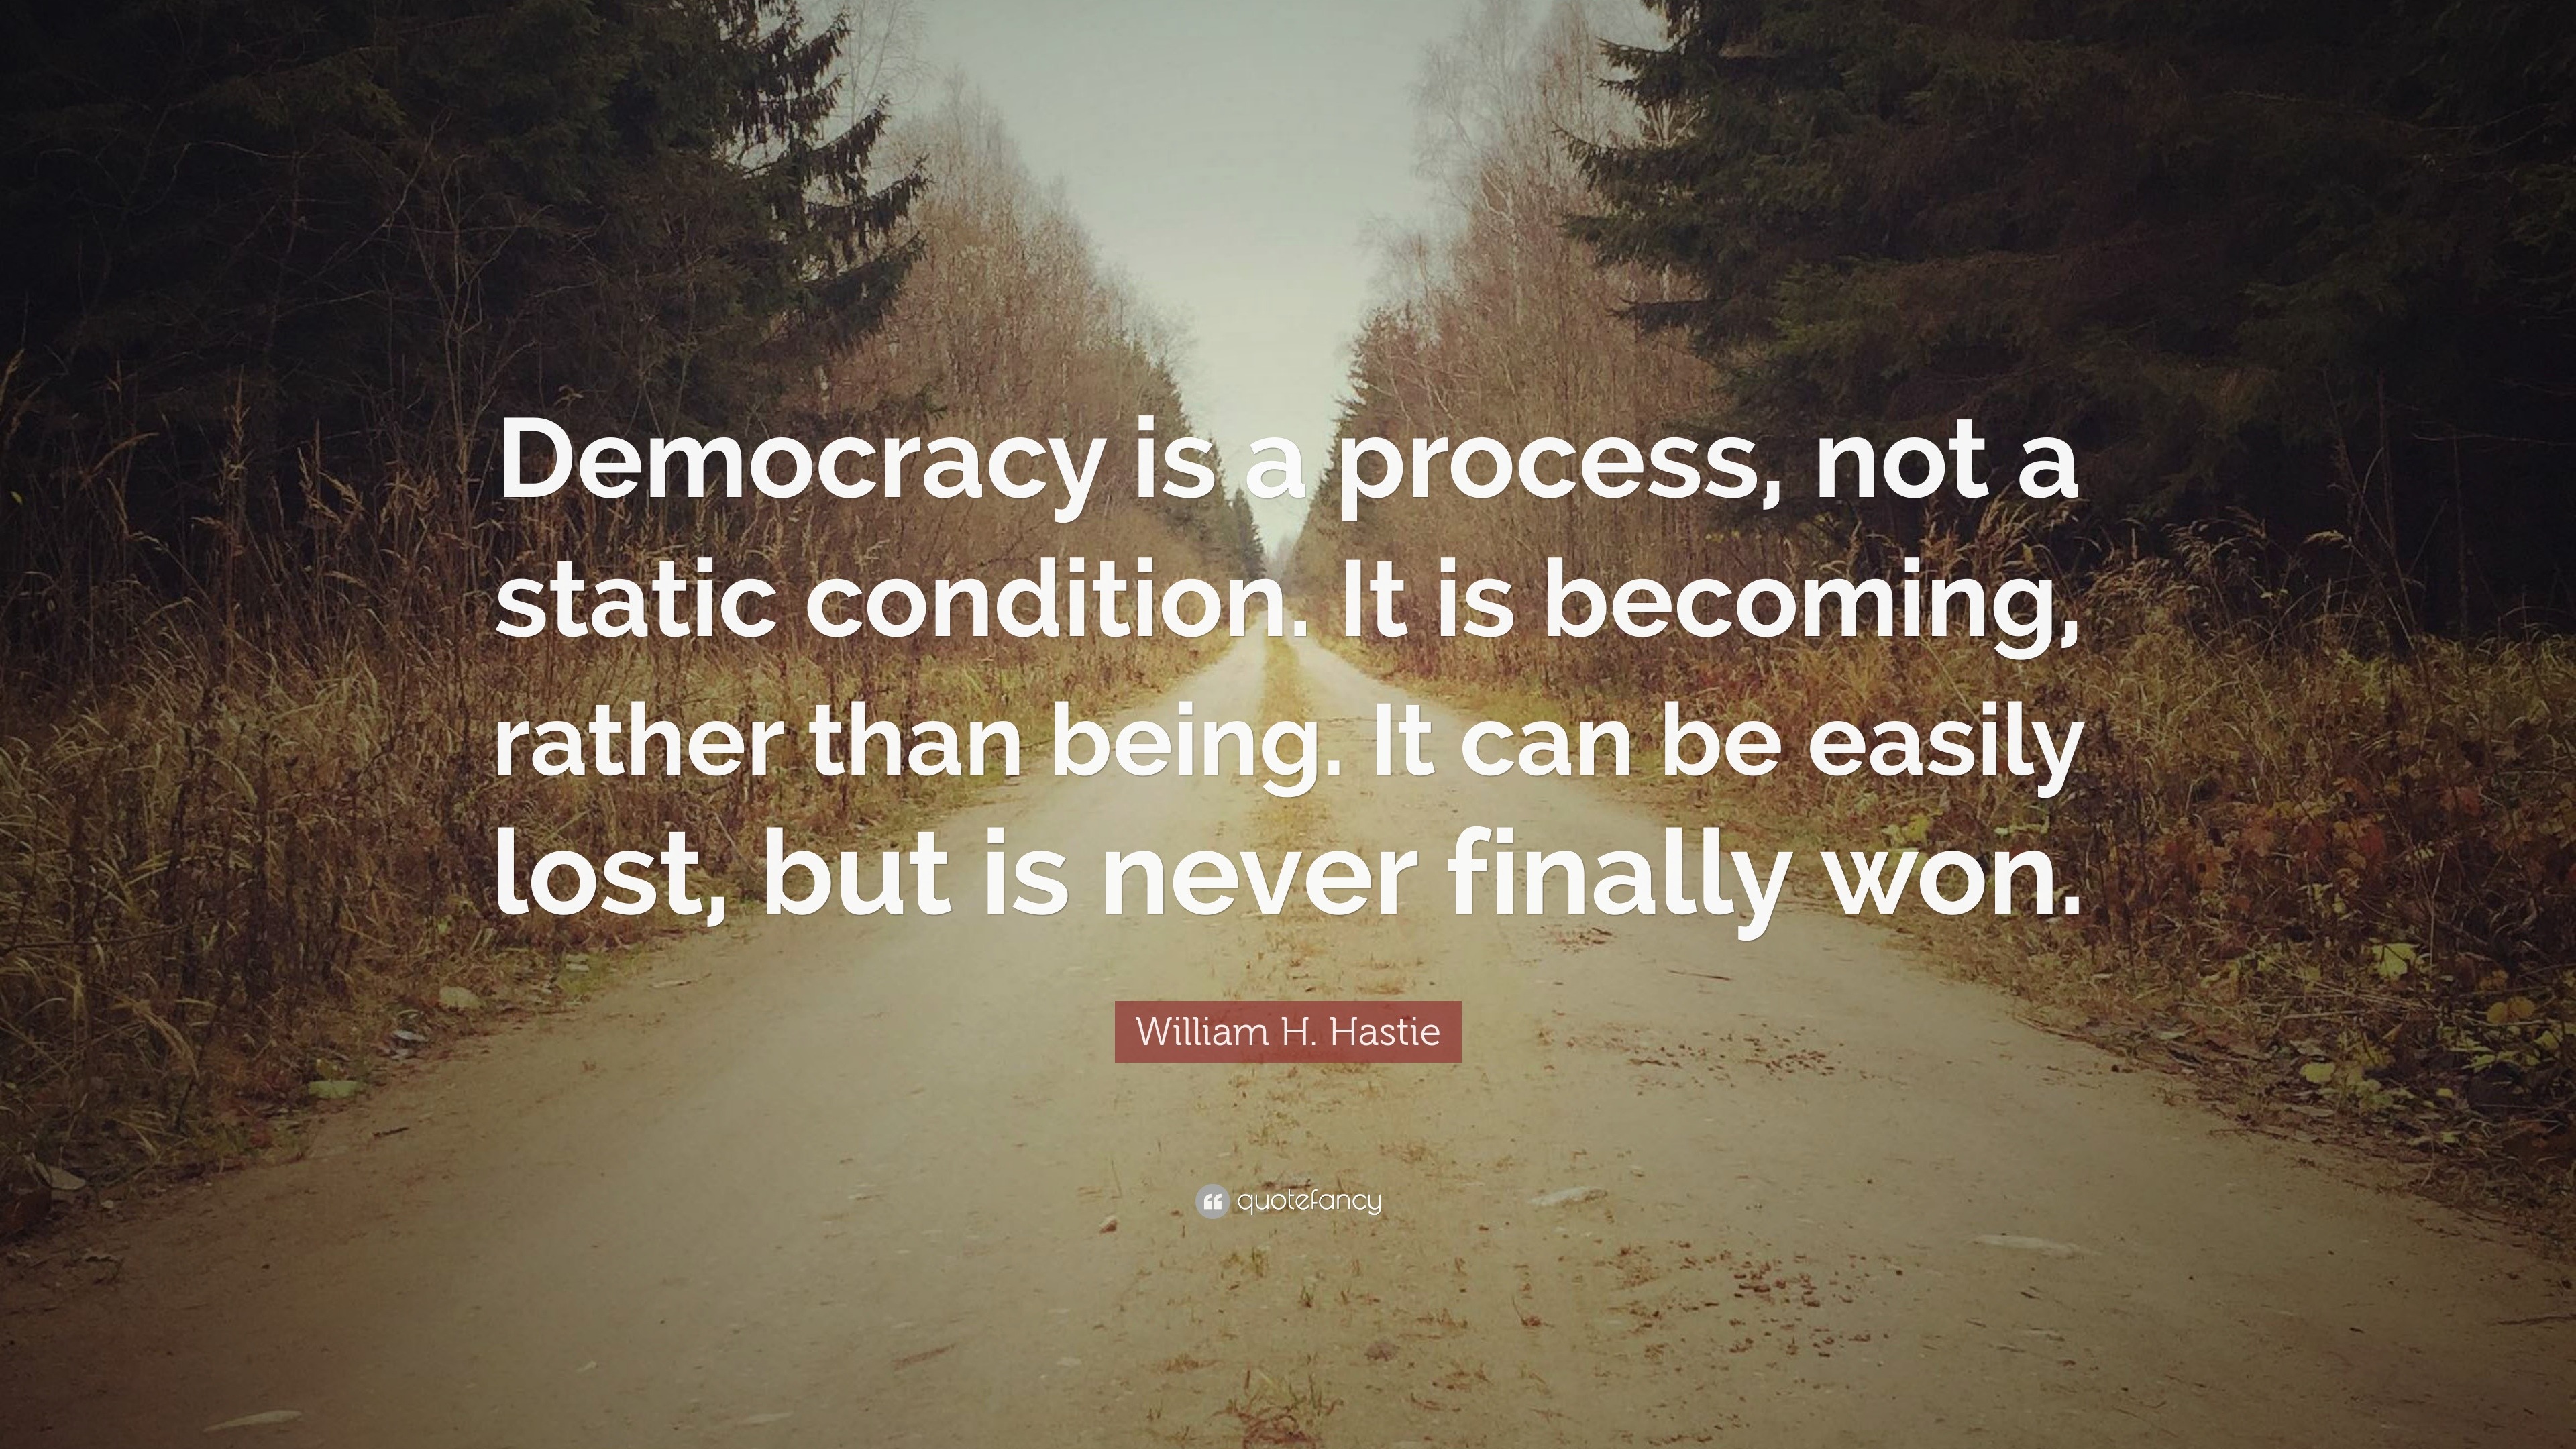 quotations about democracy essay